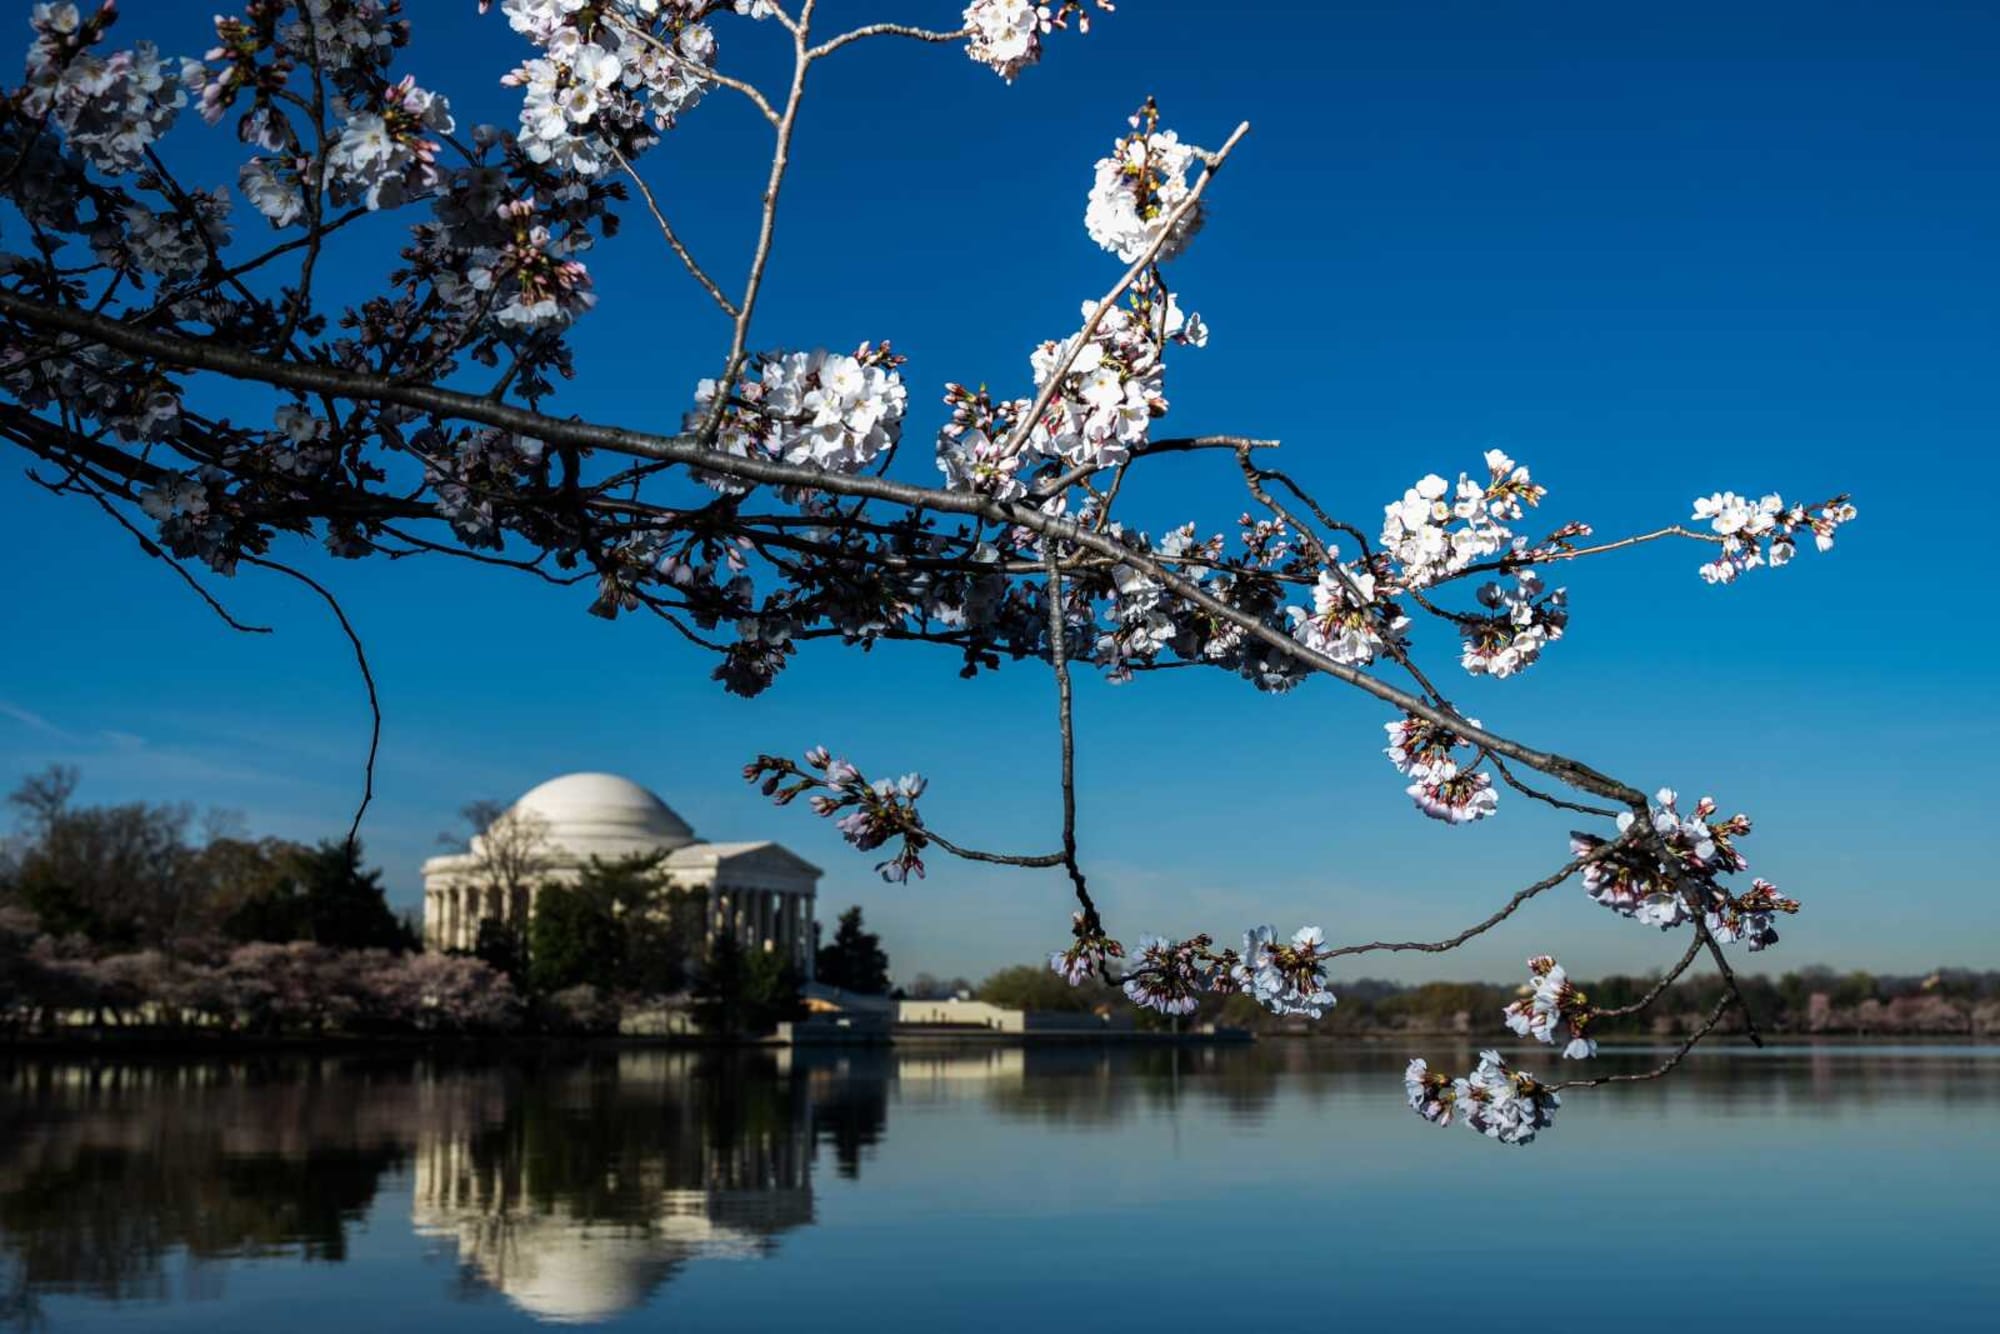 Capitals latest D.C. team to join Cherry Blossoms fun